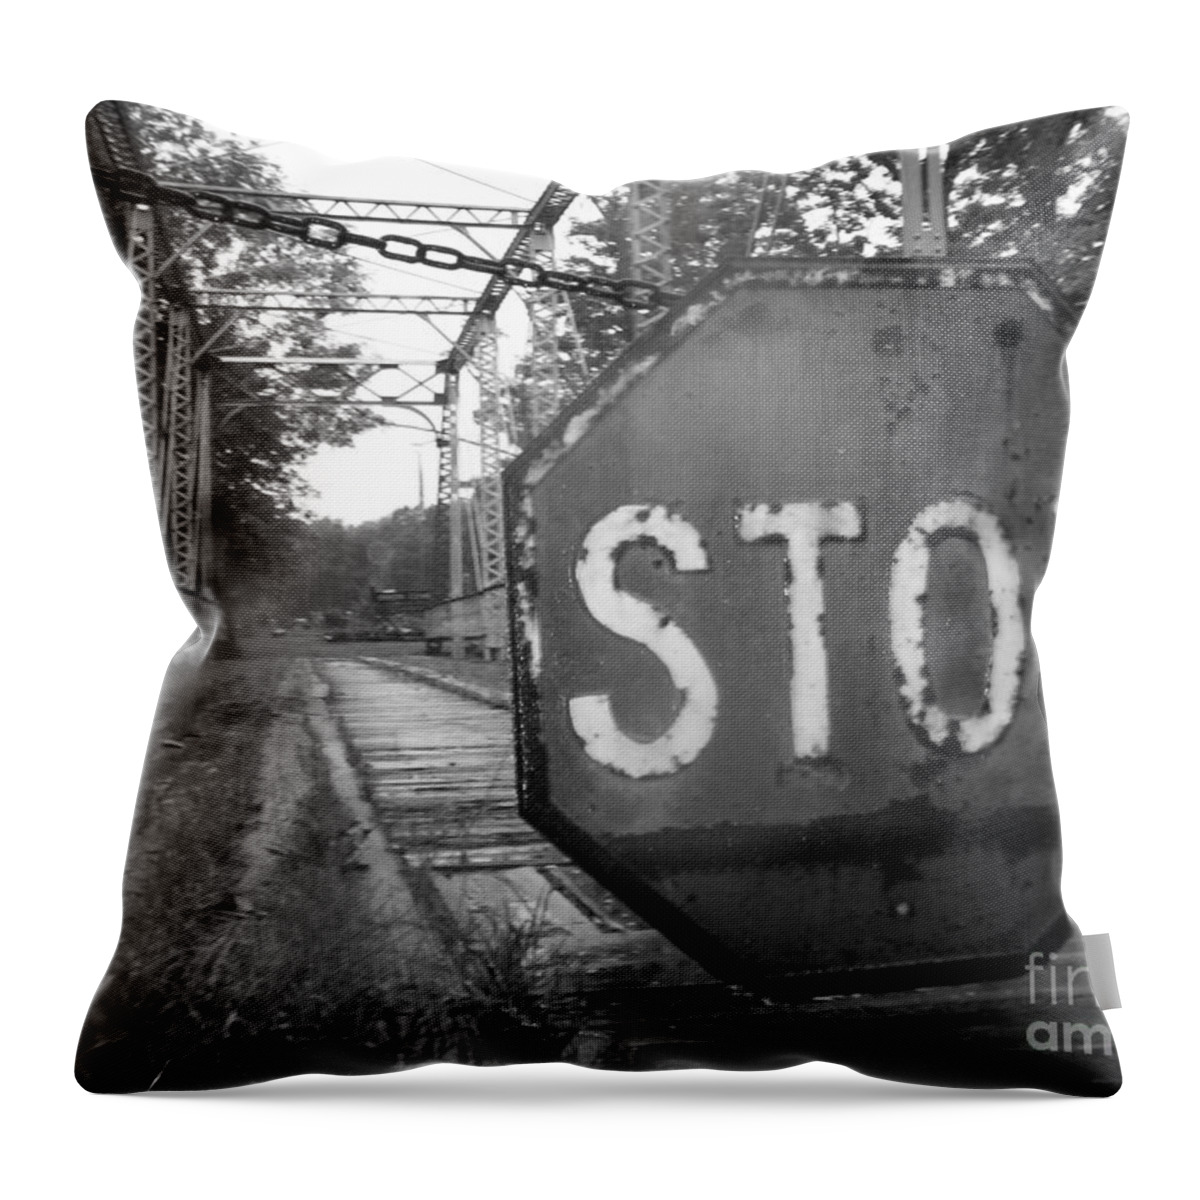 Stop Sign Throw Pillow featuring the photograph Stop Sign by Michael Krek